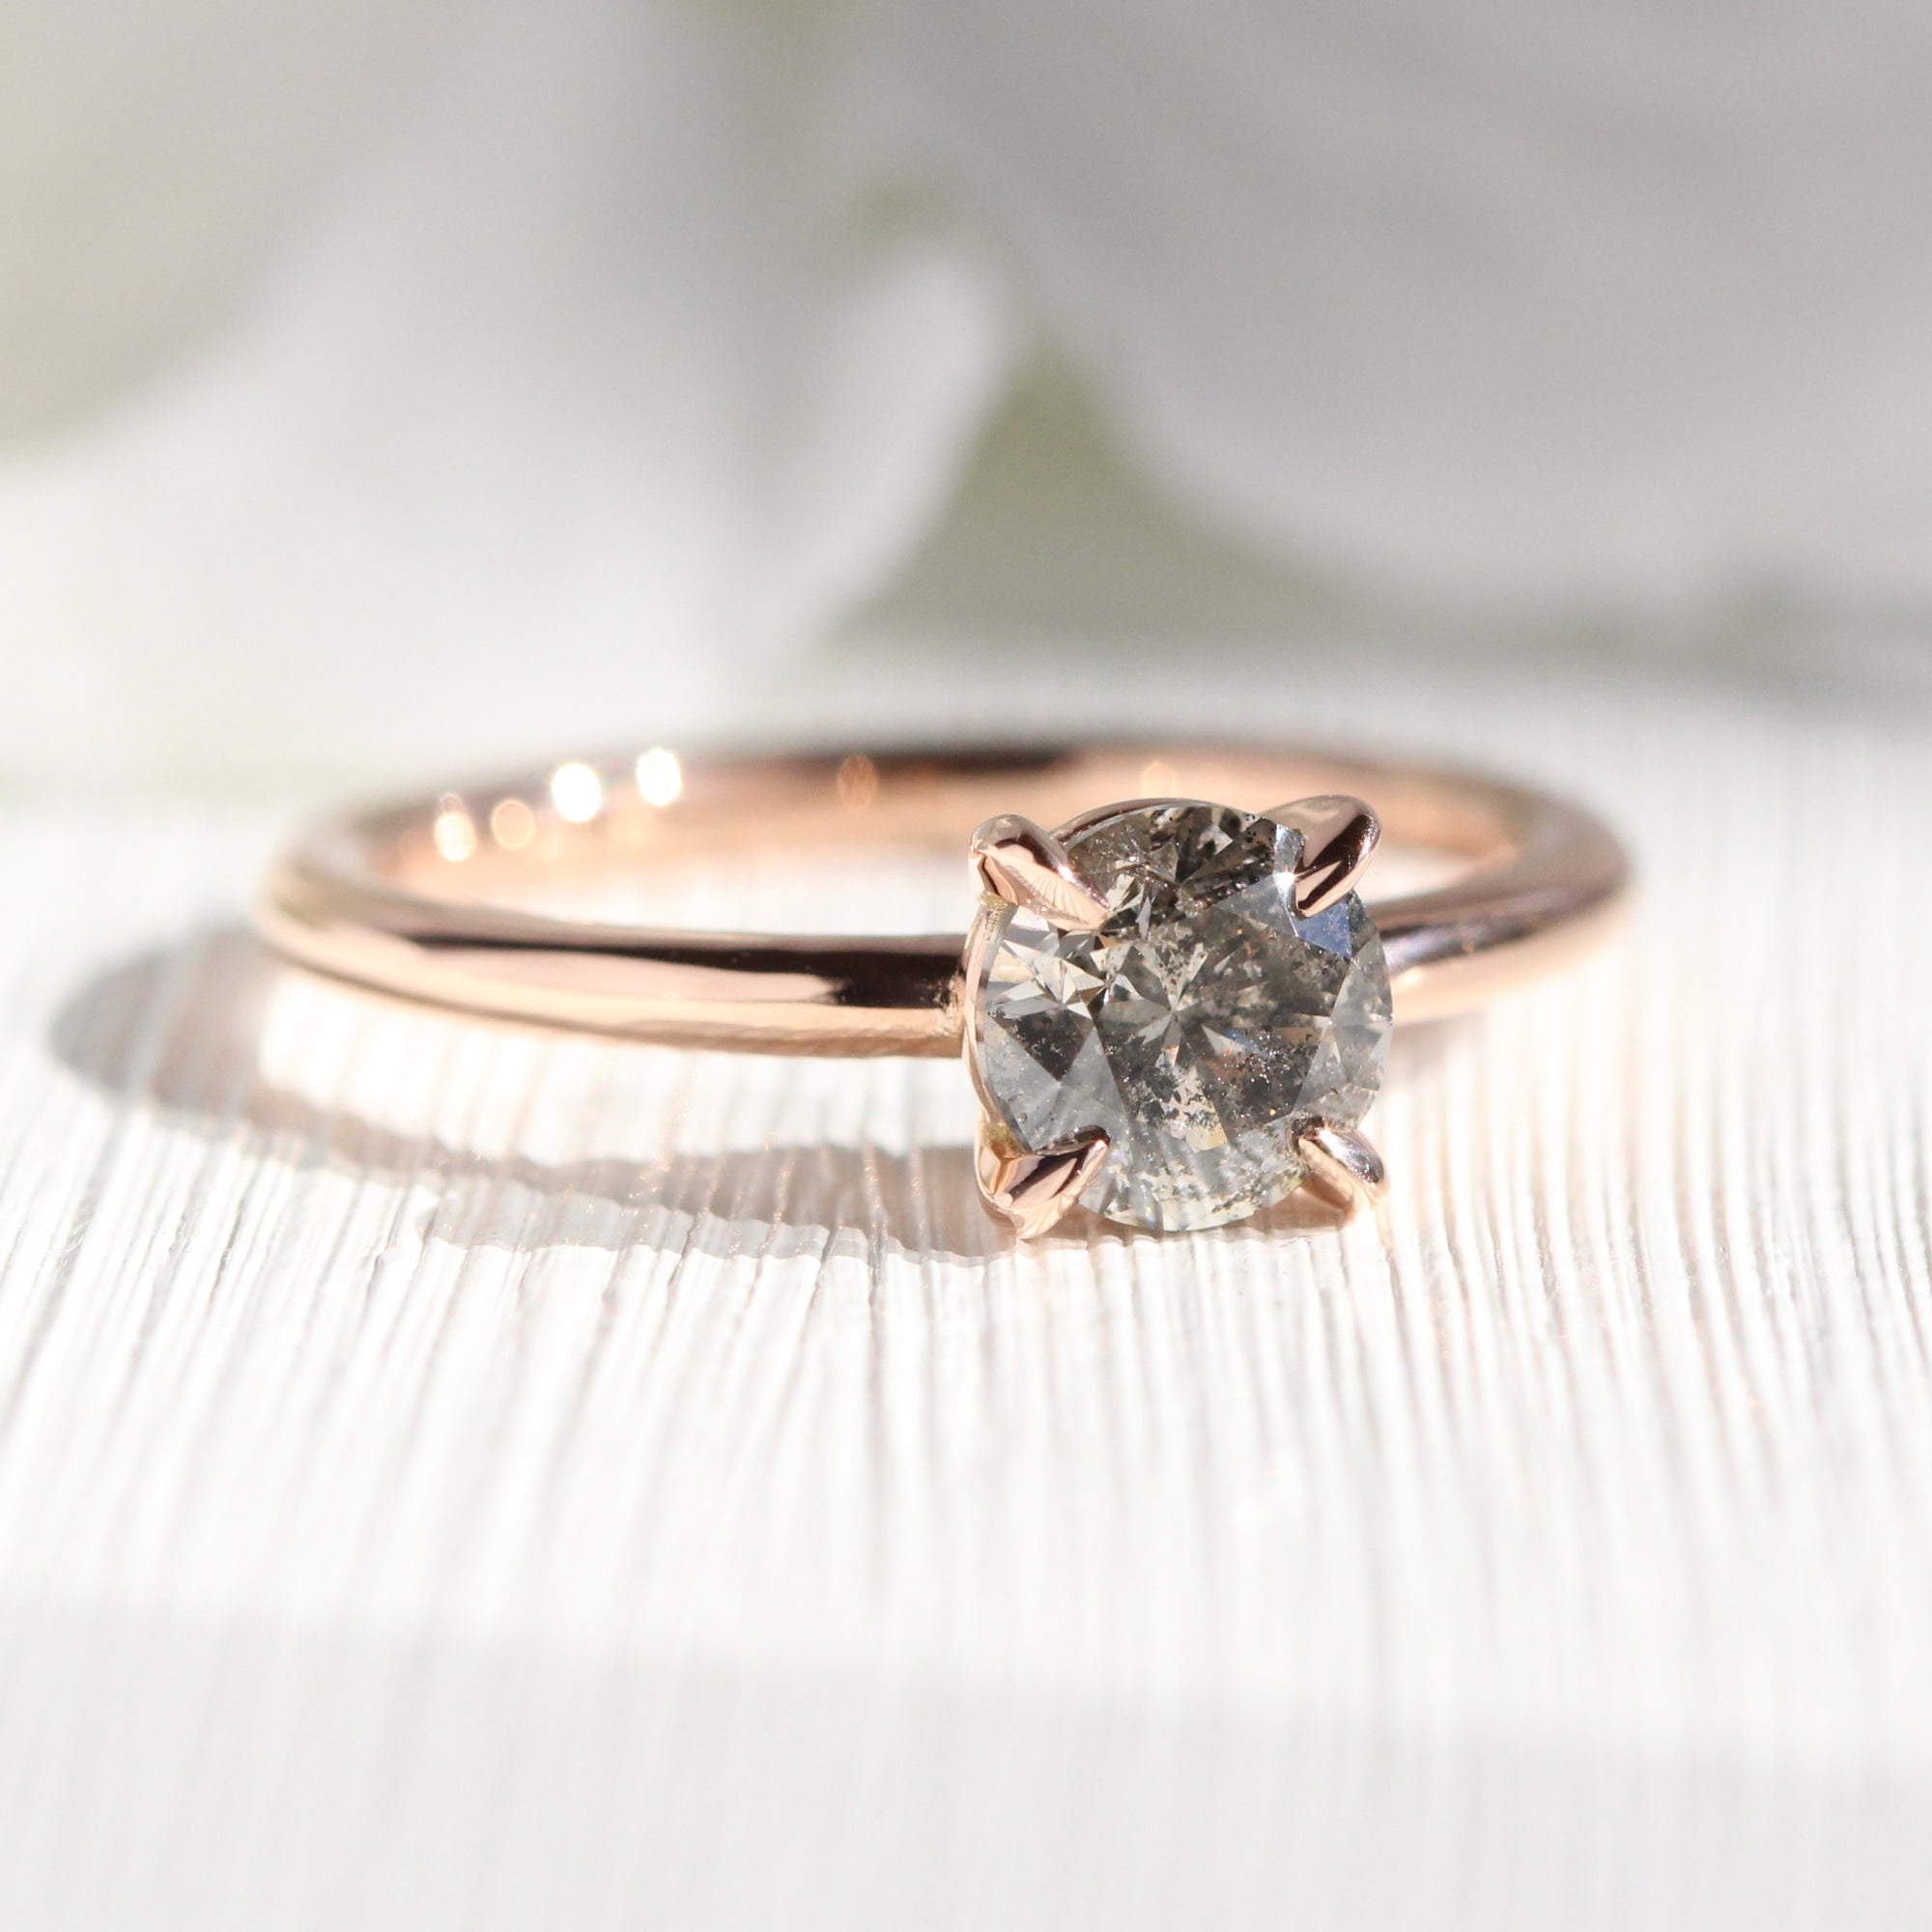 Salt and Pepper Diamond Engagement Ring Rose Gold Solitaire Grey Diamond Ring La More Design Jewelry